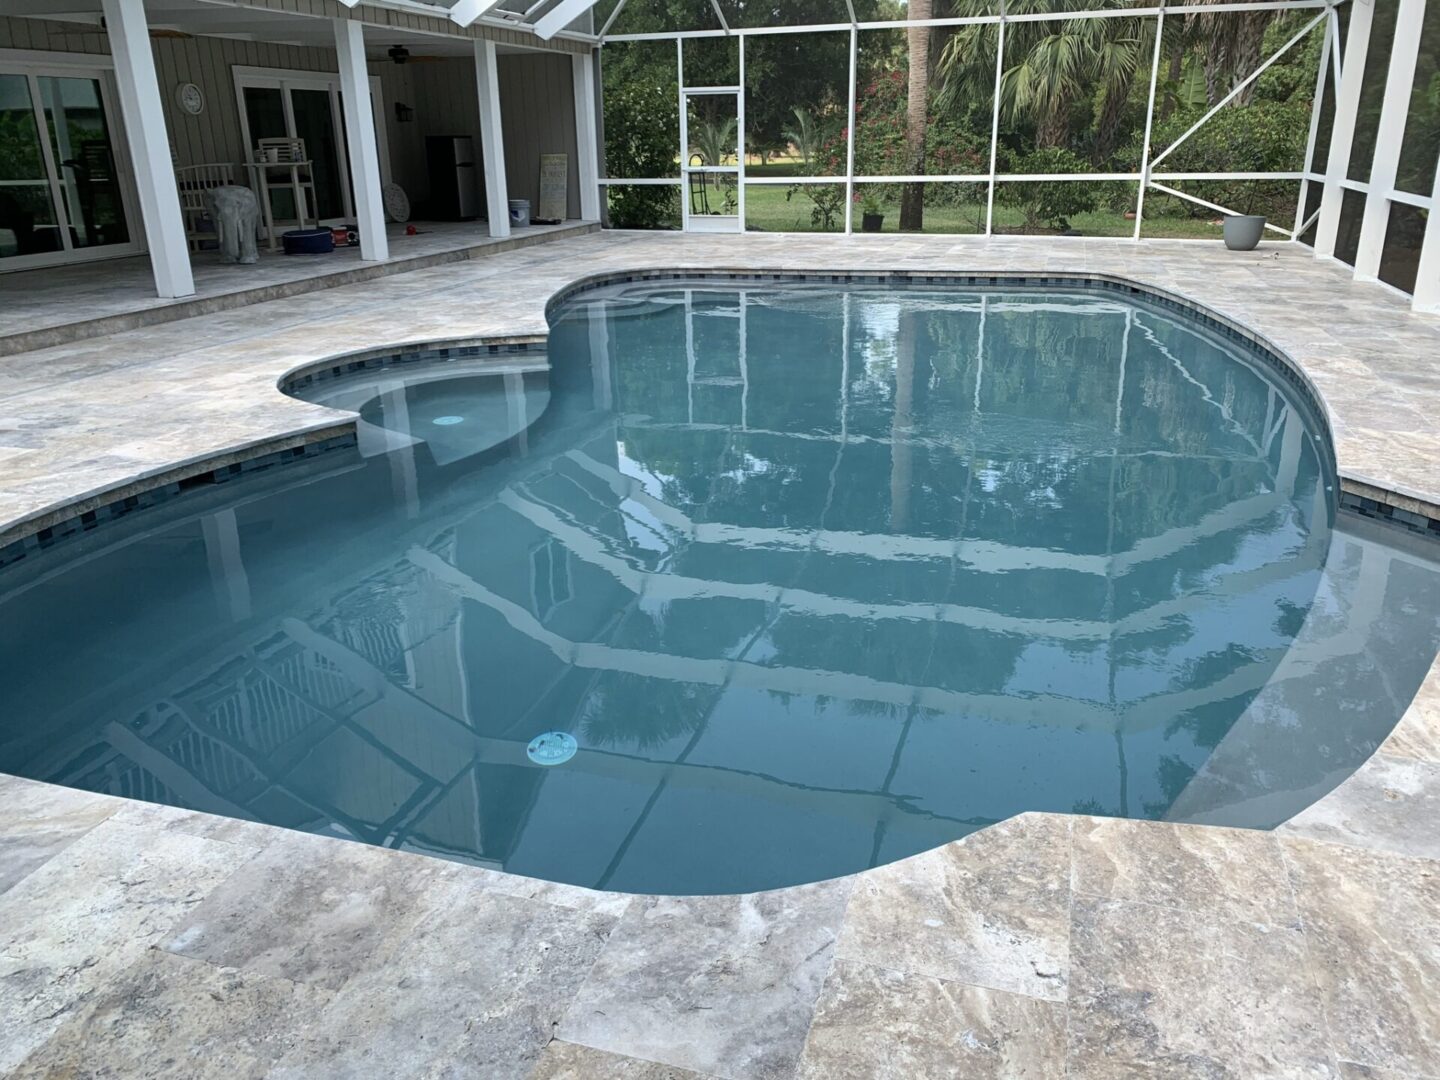 A pool that has been cleaned and is ready for use.